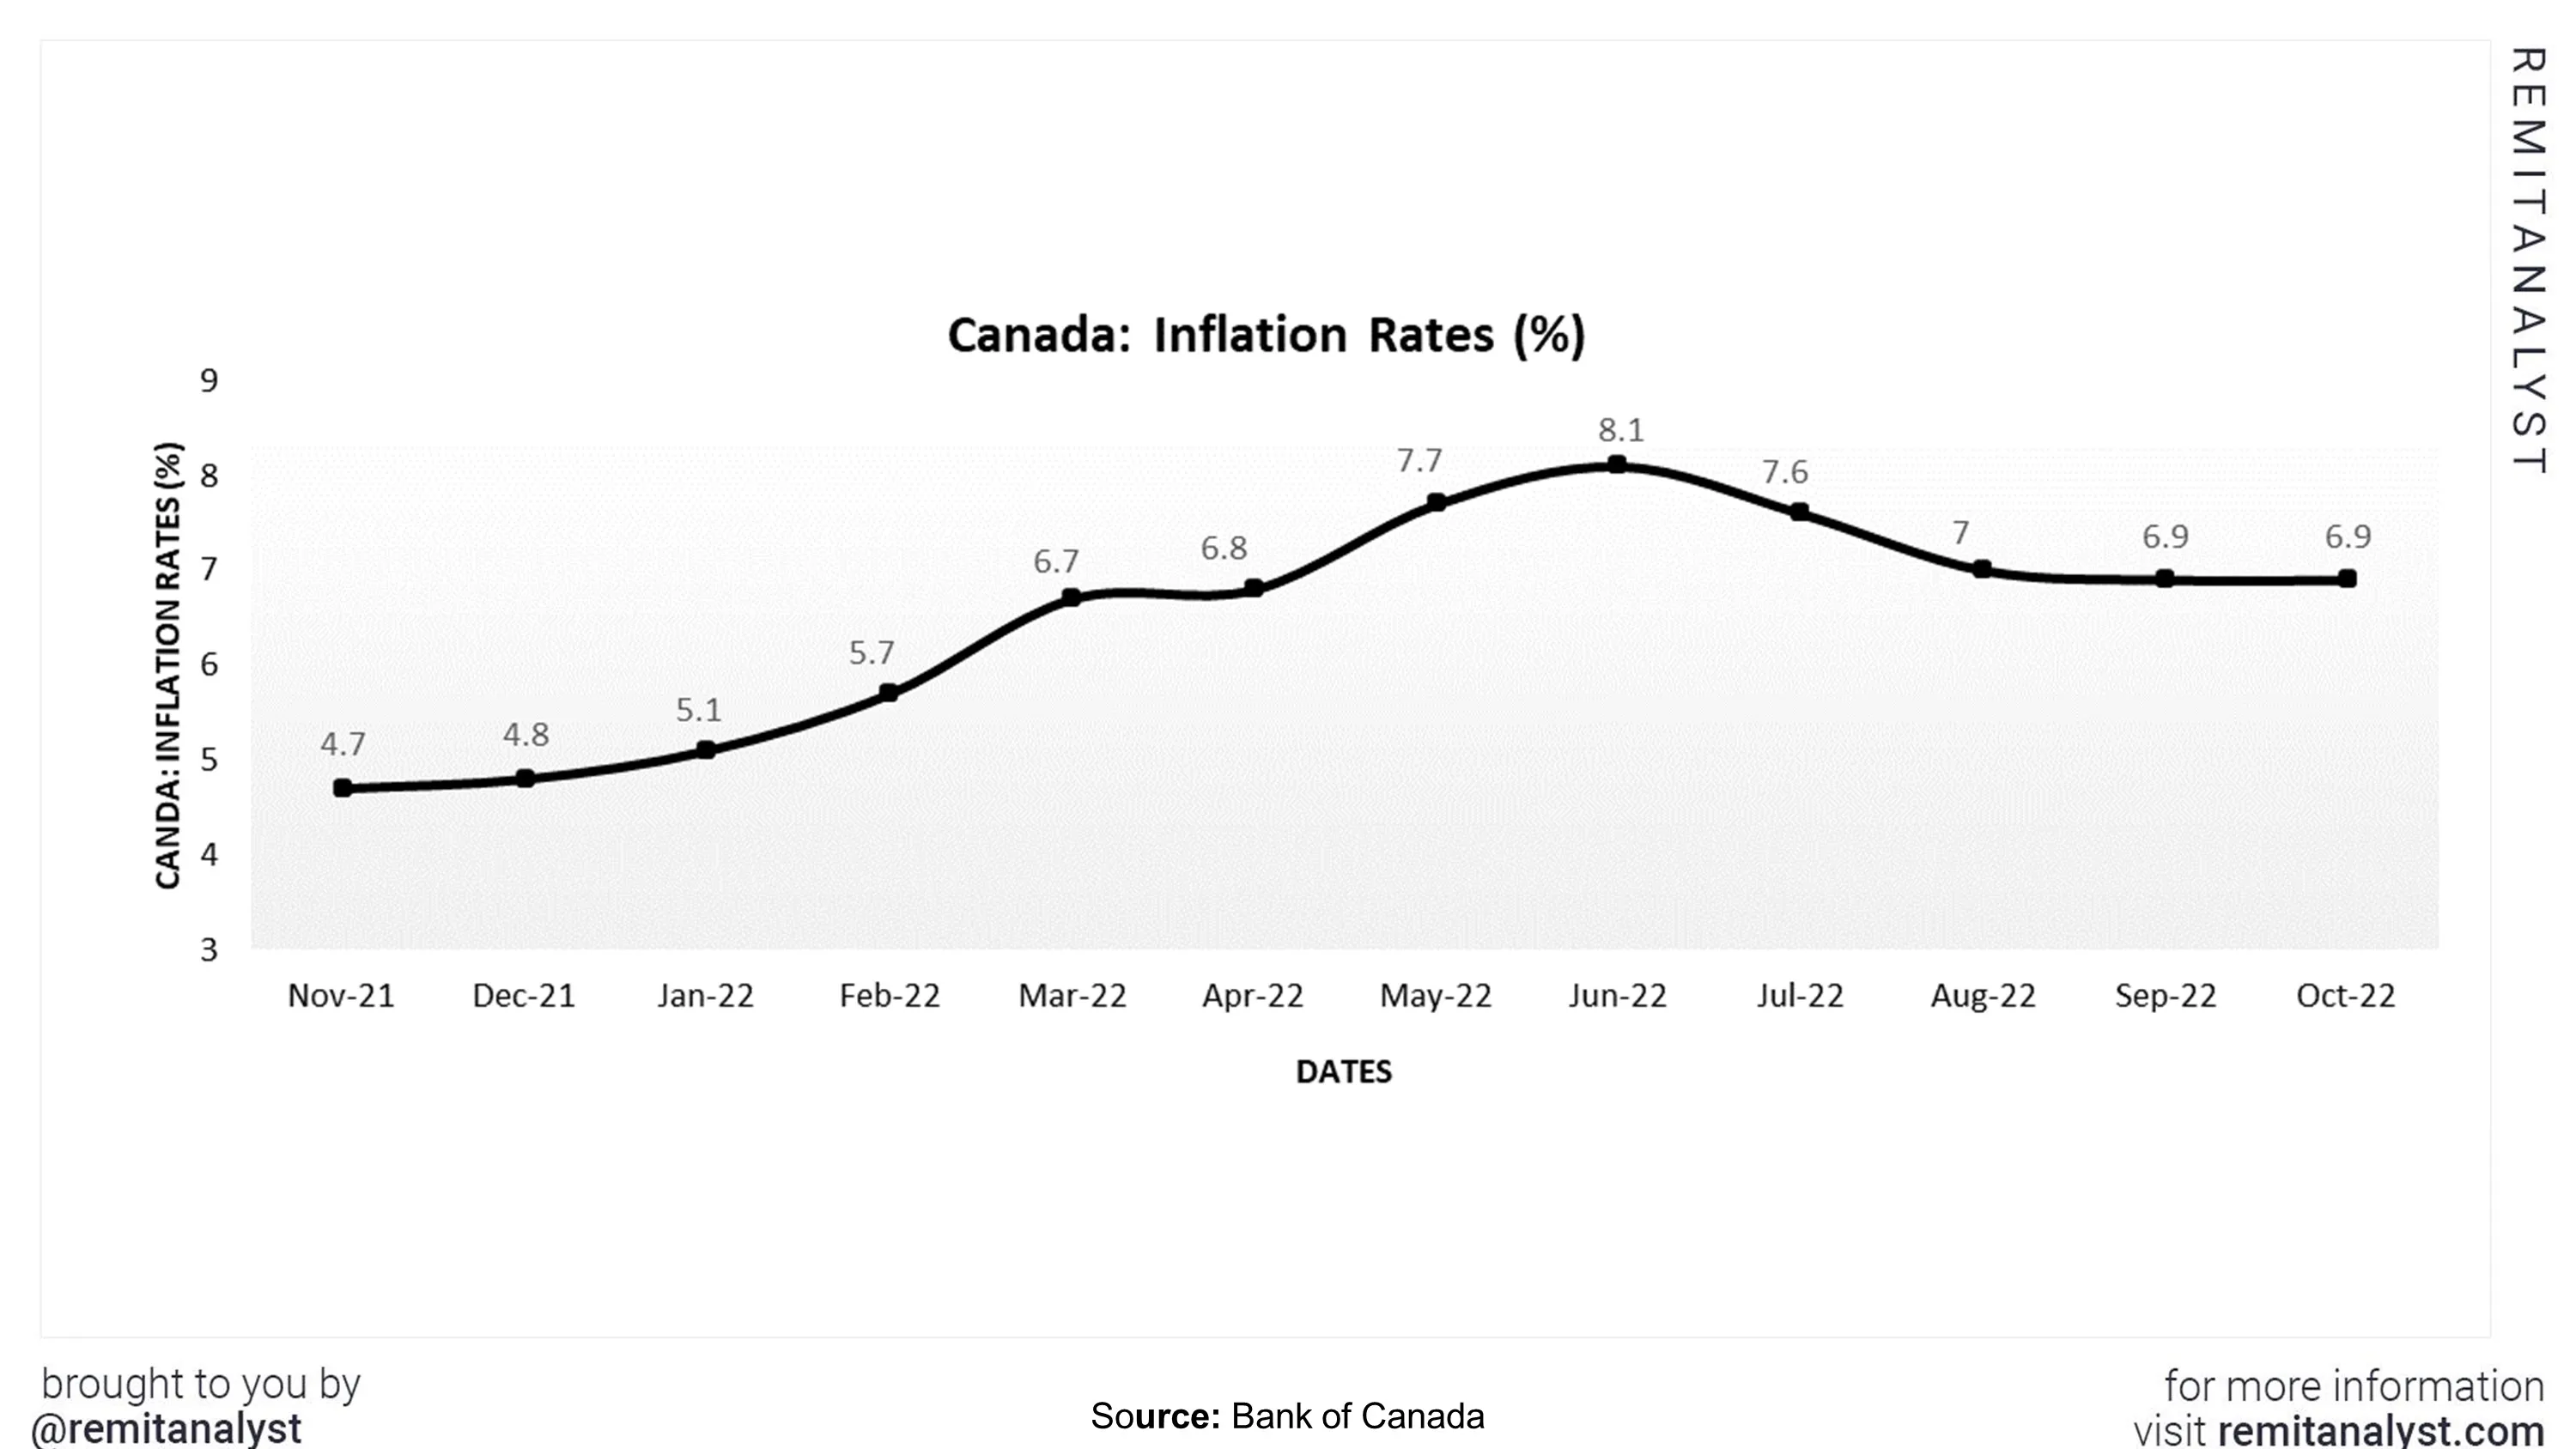 inflation-rates-canada-from-nov-2021-to-oct-2022